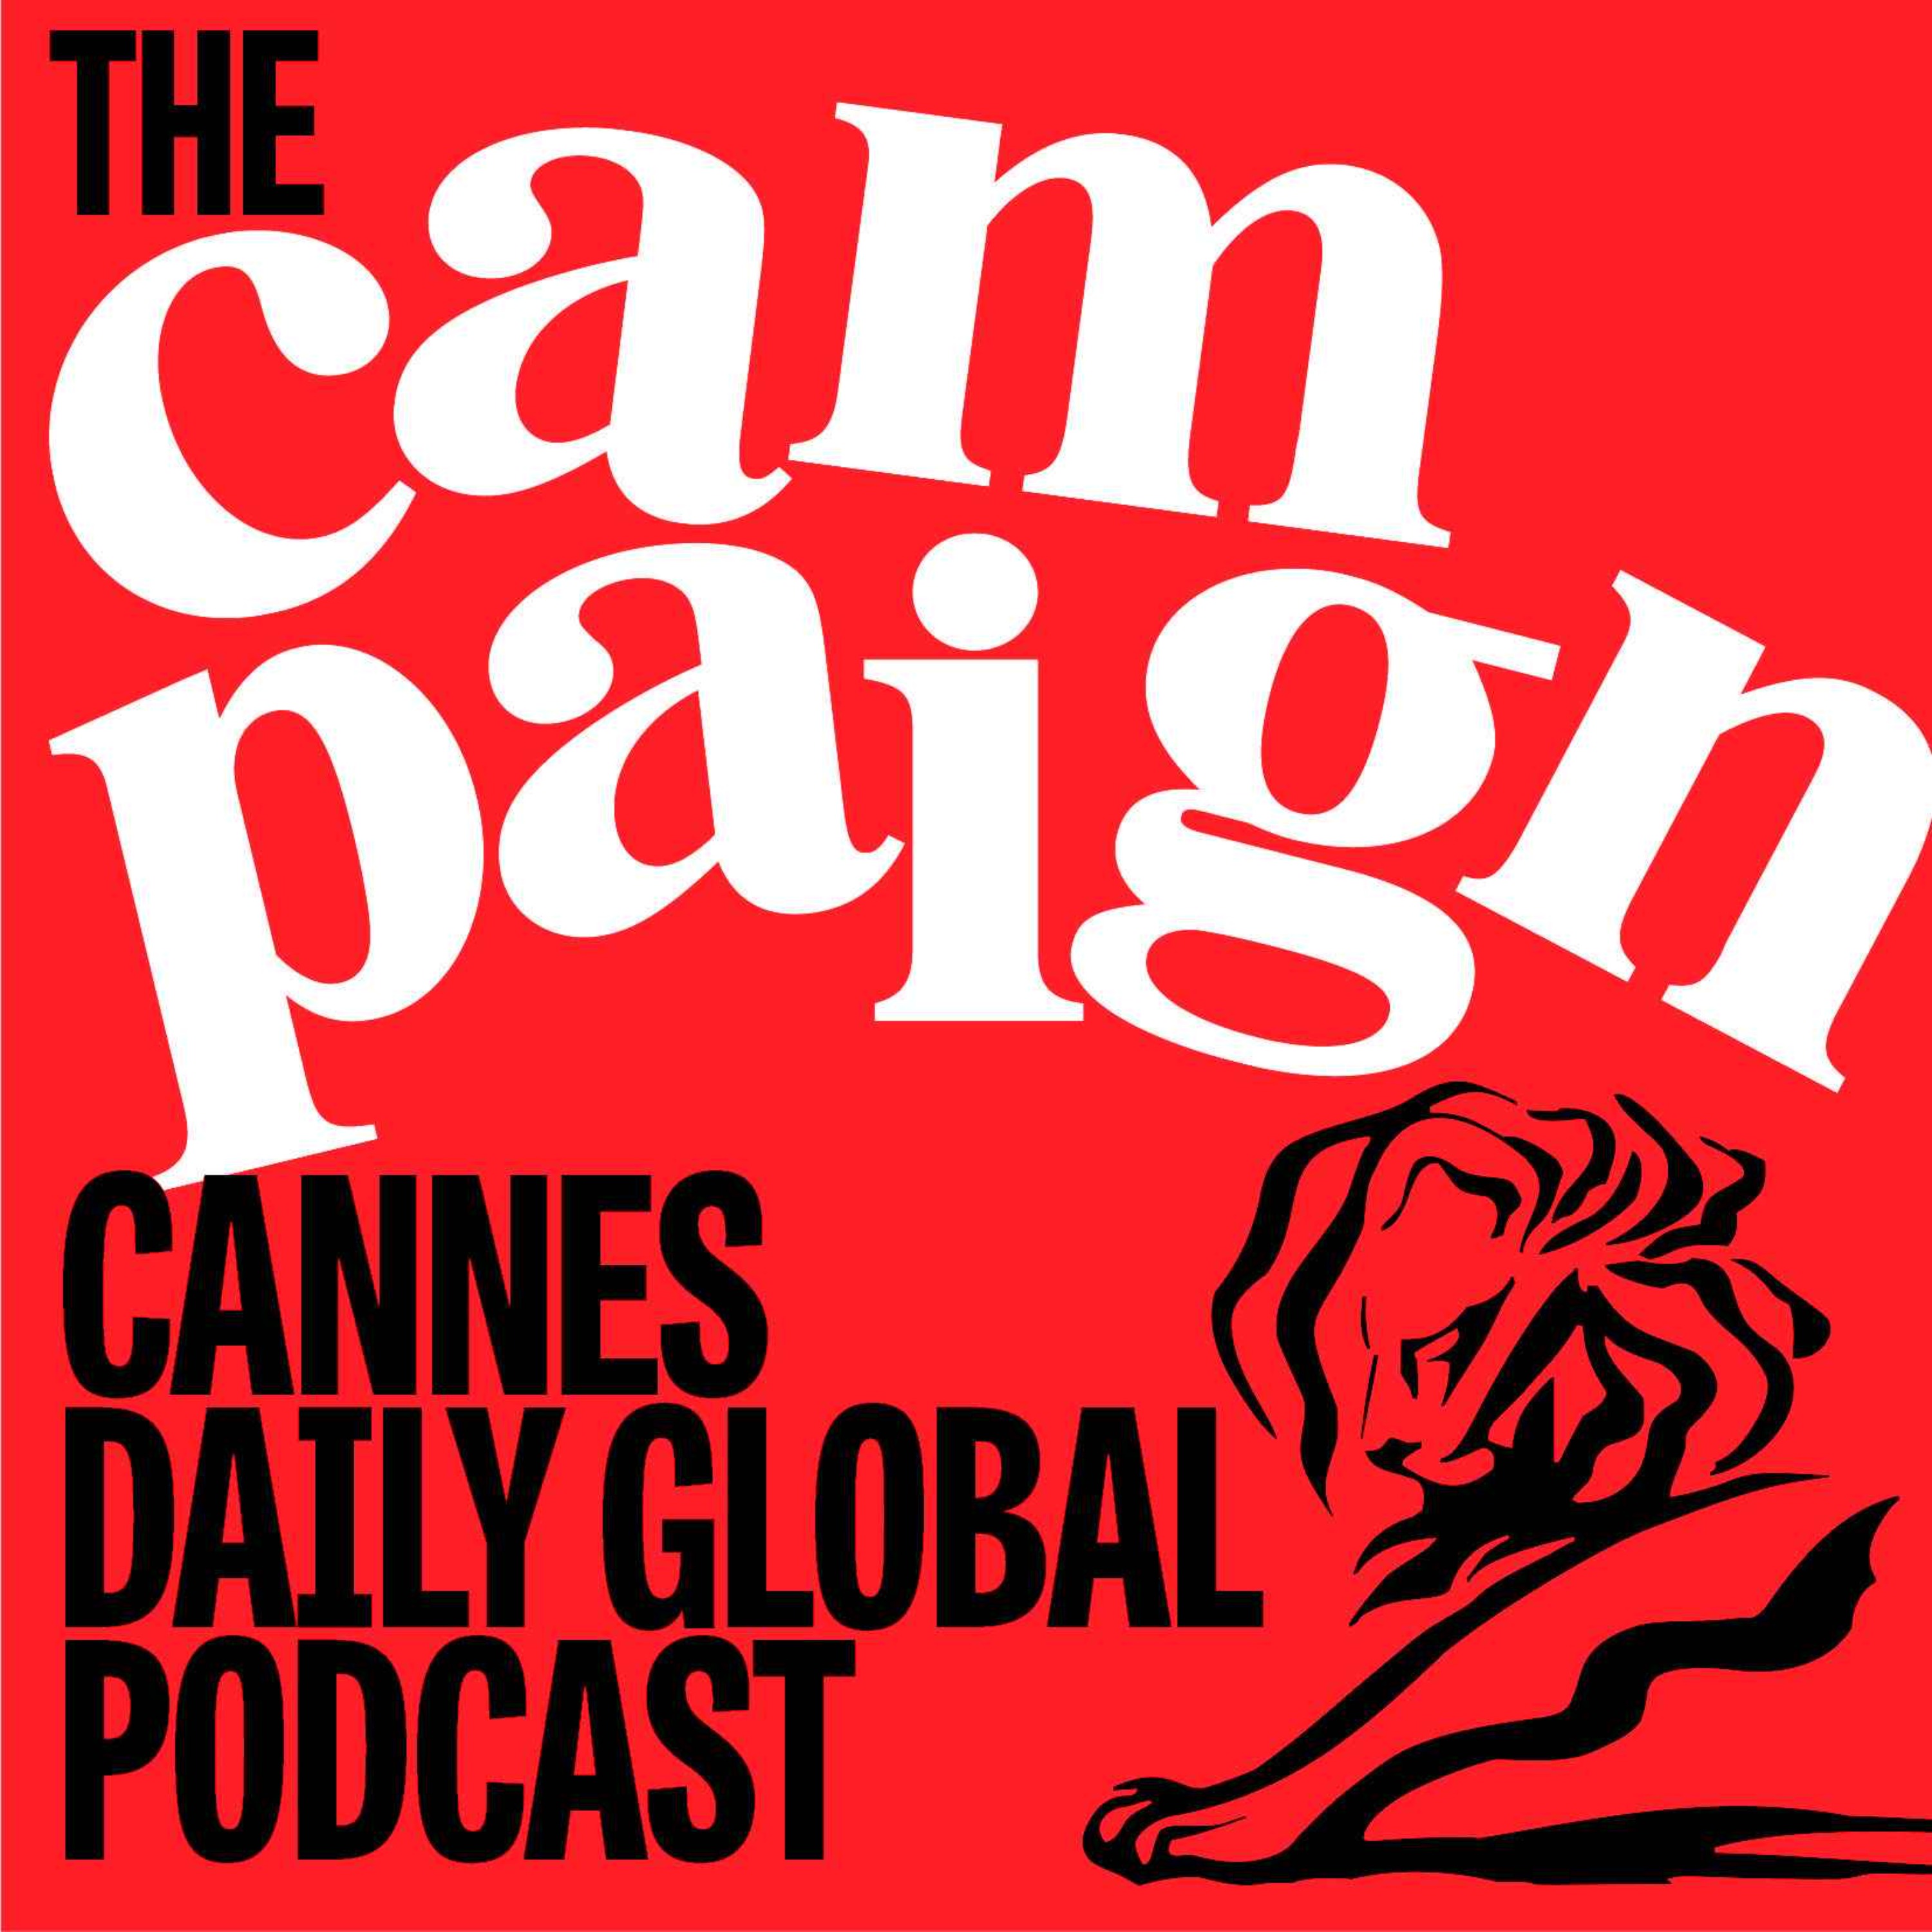 Cannes Daily Global Podcast ep. 6: Festival review and GUT on winning agency of year